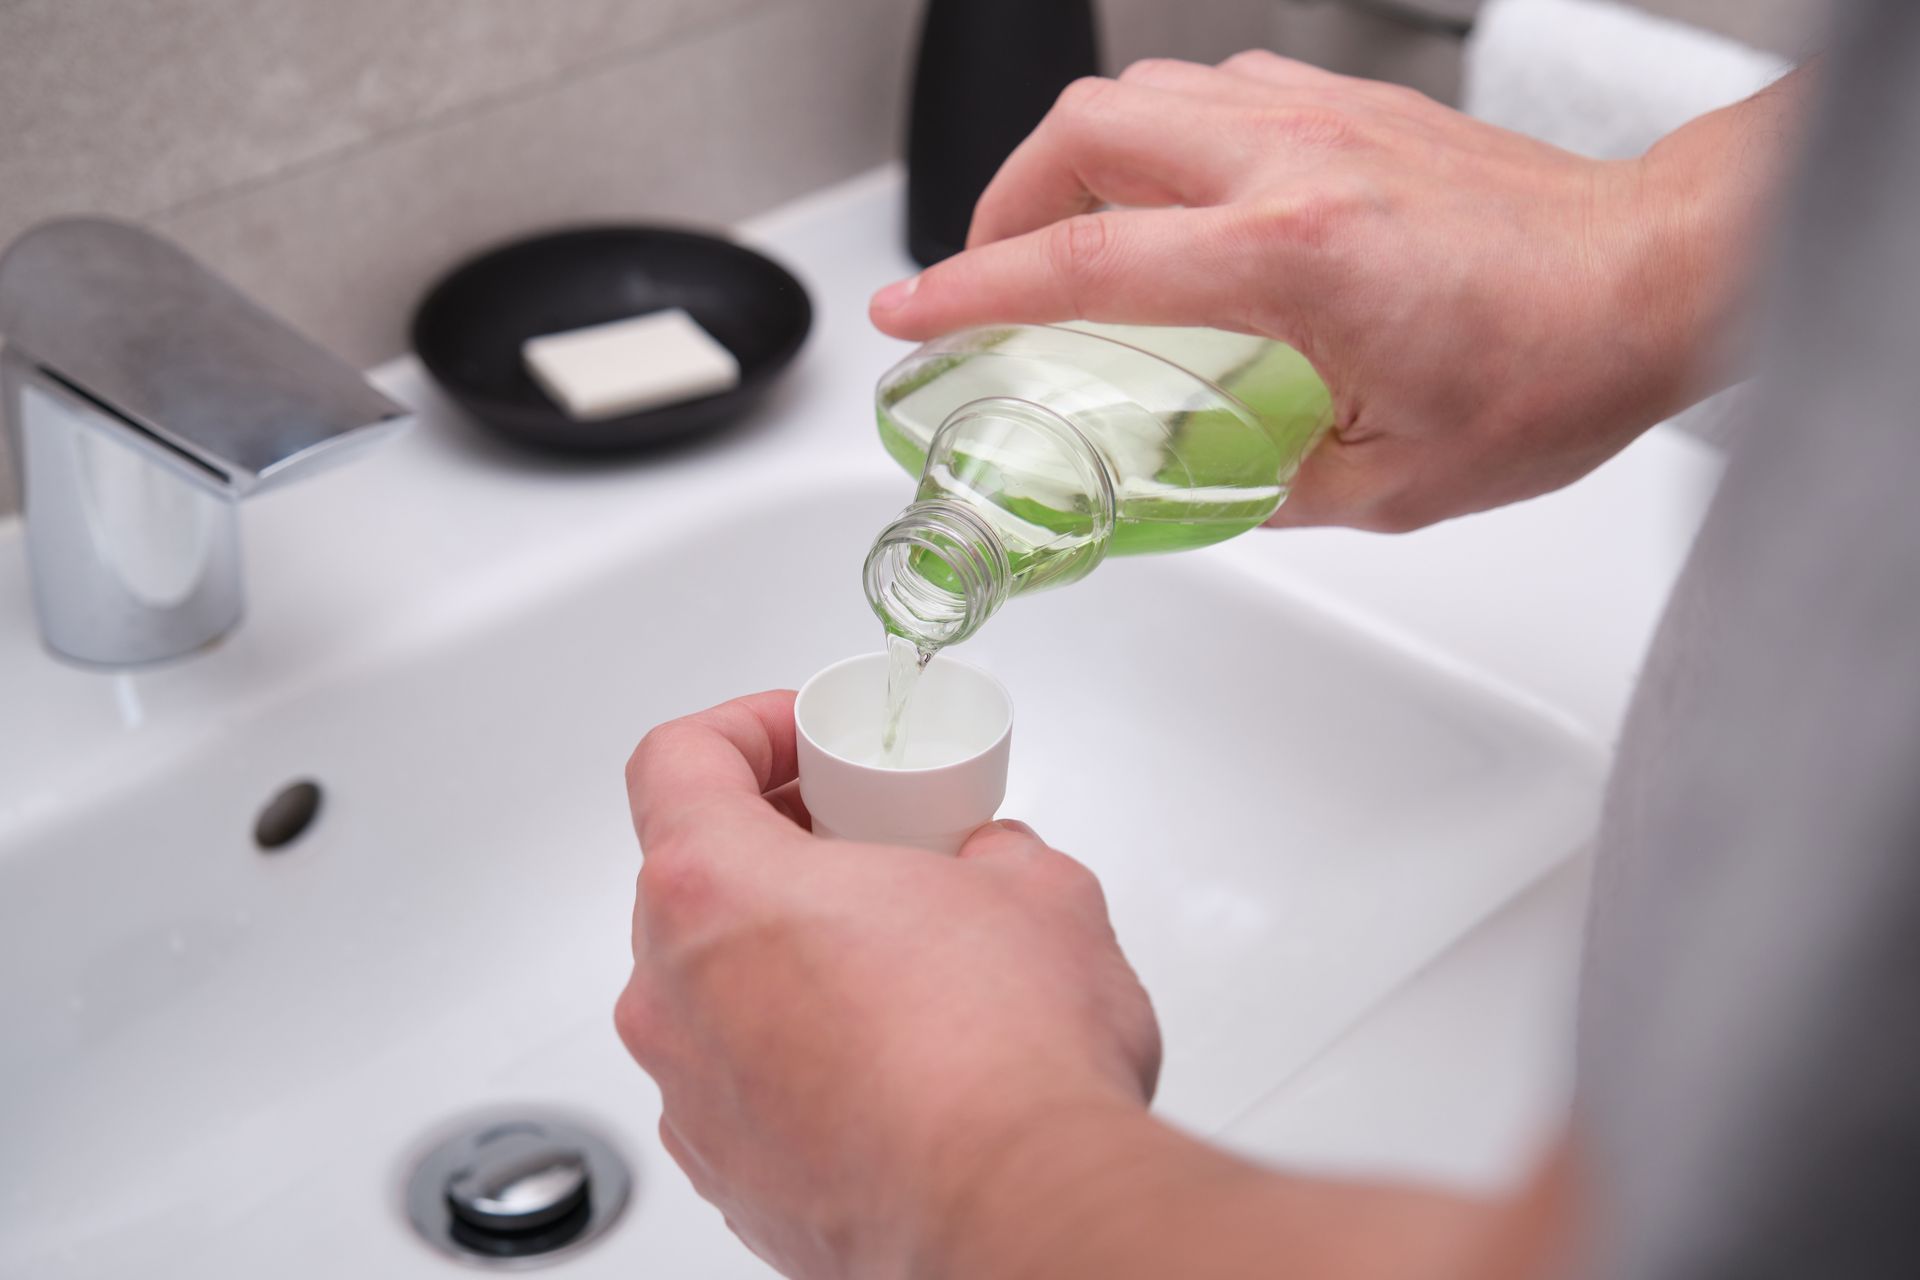 Man pouring green mouthwash from bottle into cap in bathroom